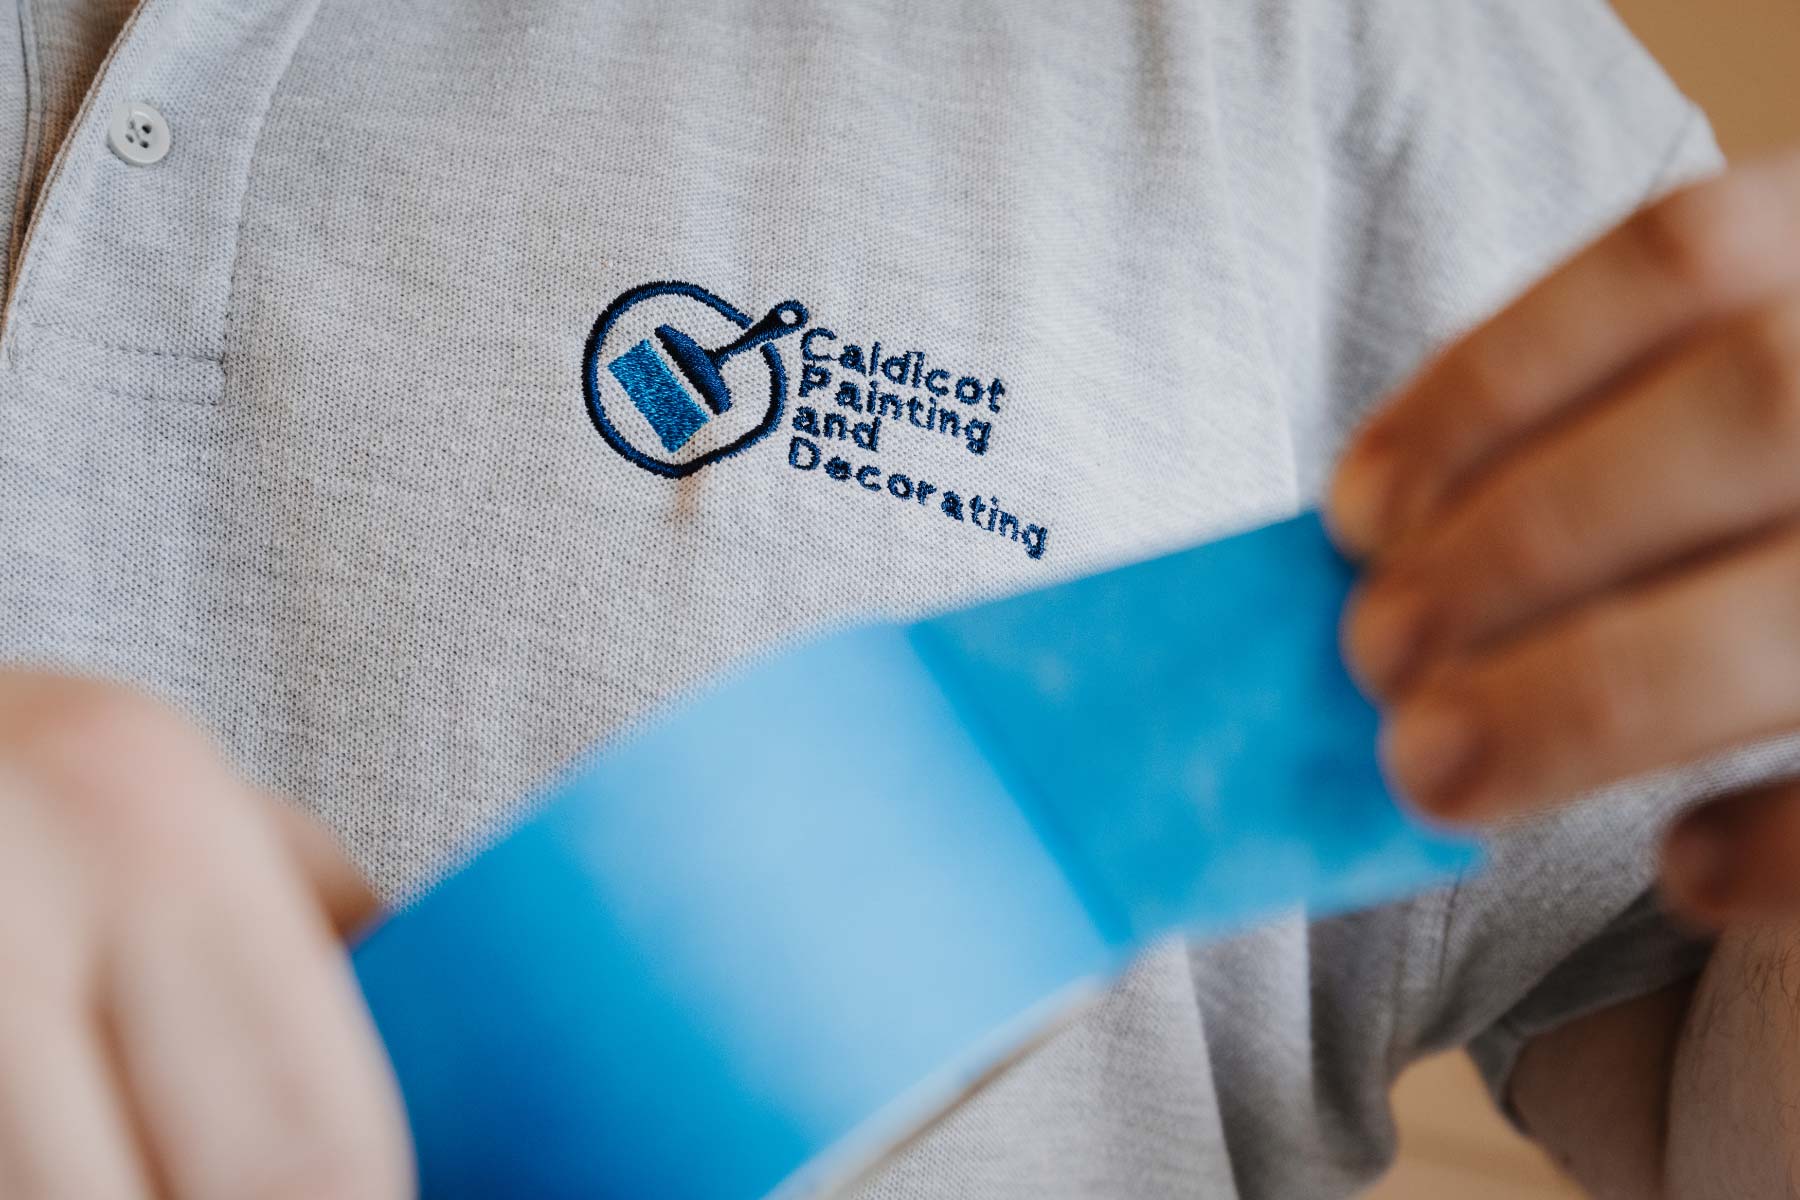 Close up of shirt with company logo on a shirt wih blurry hands holding blue tape in the foreground